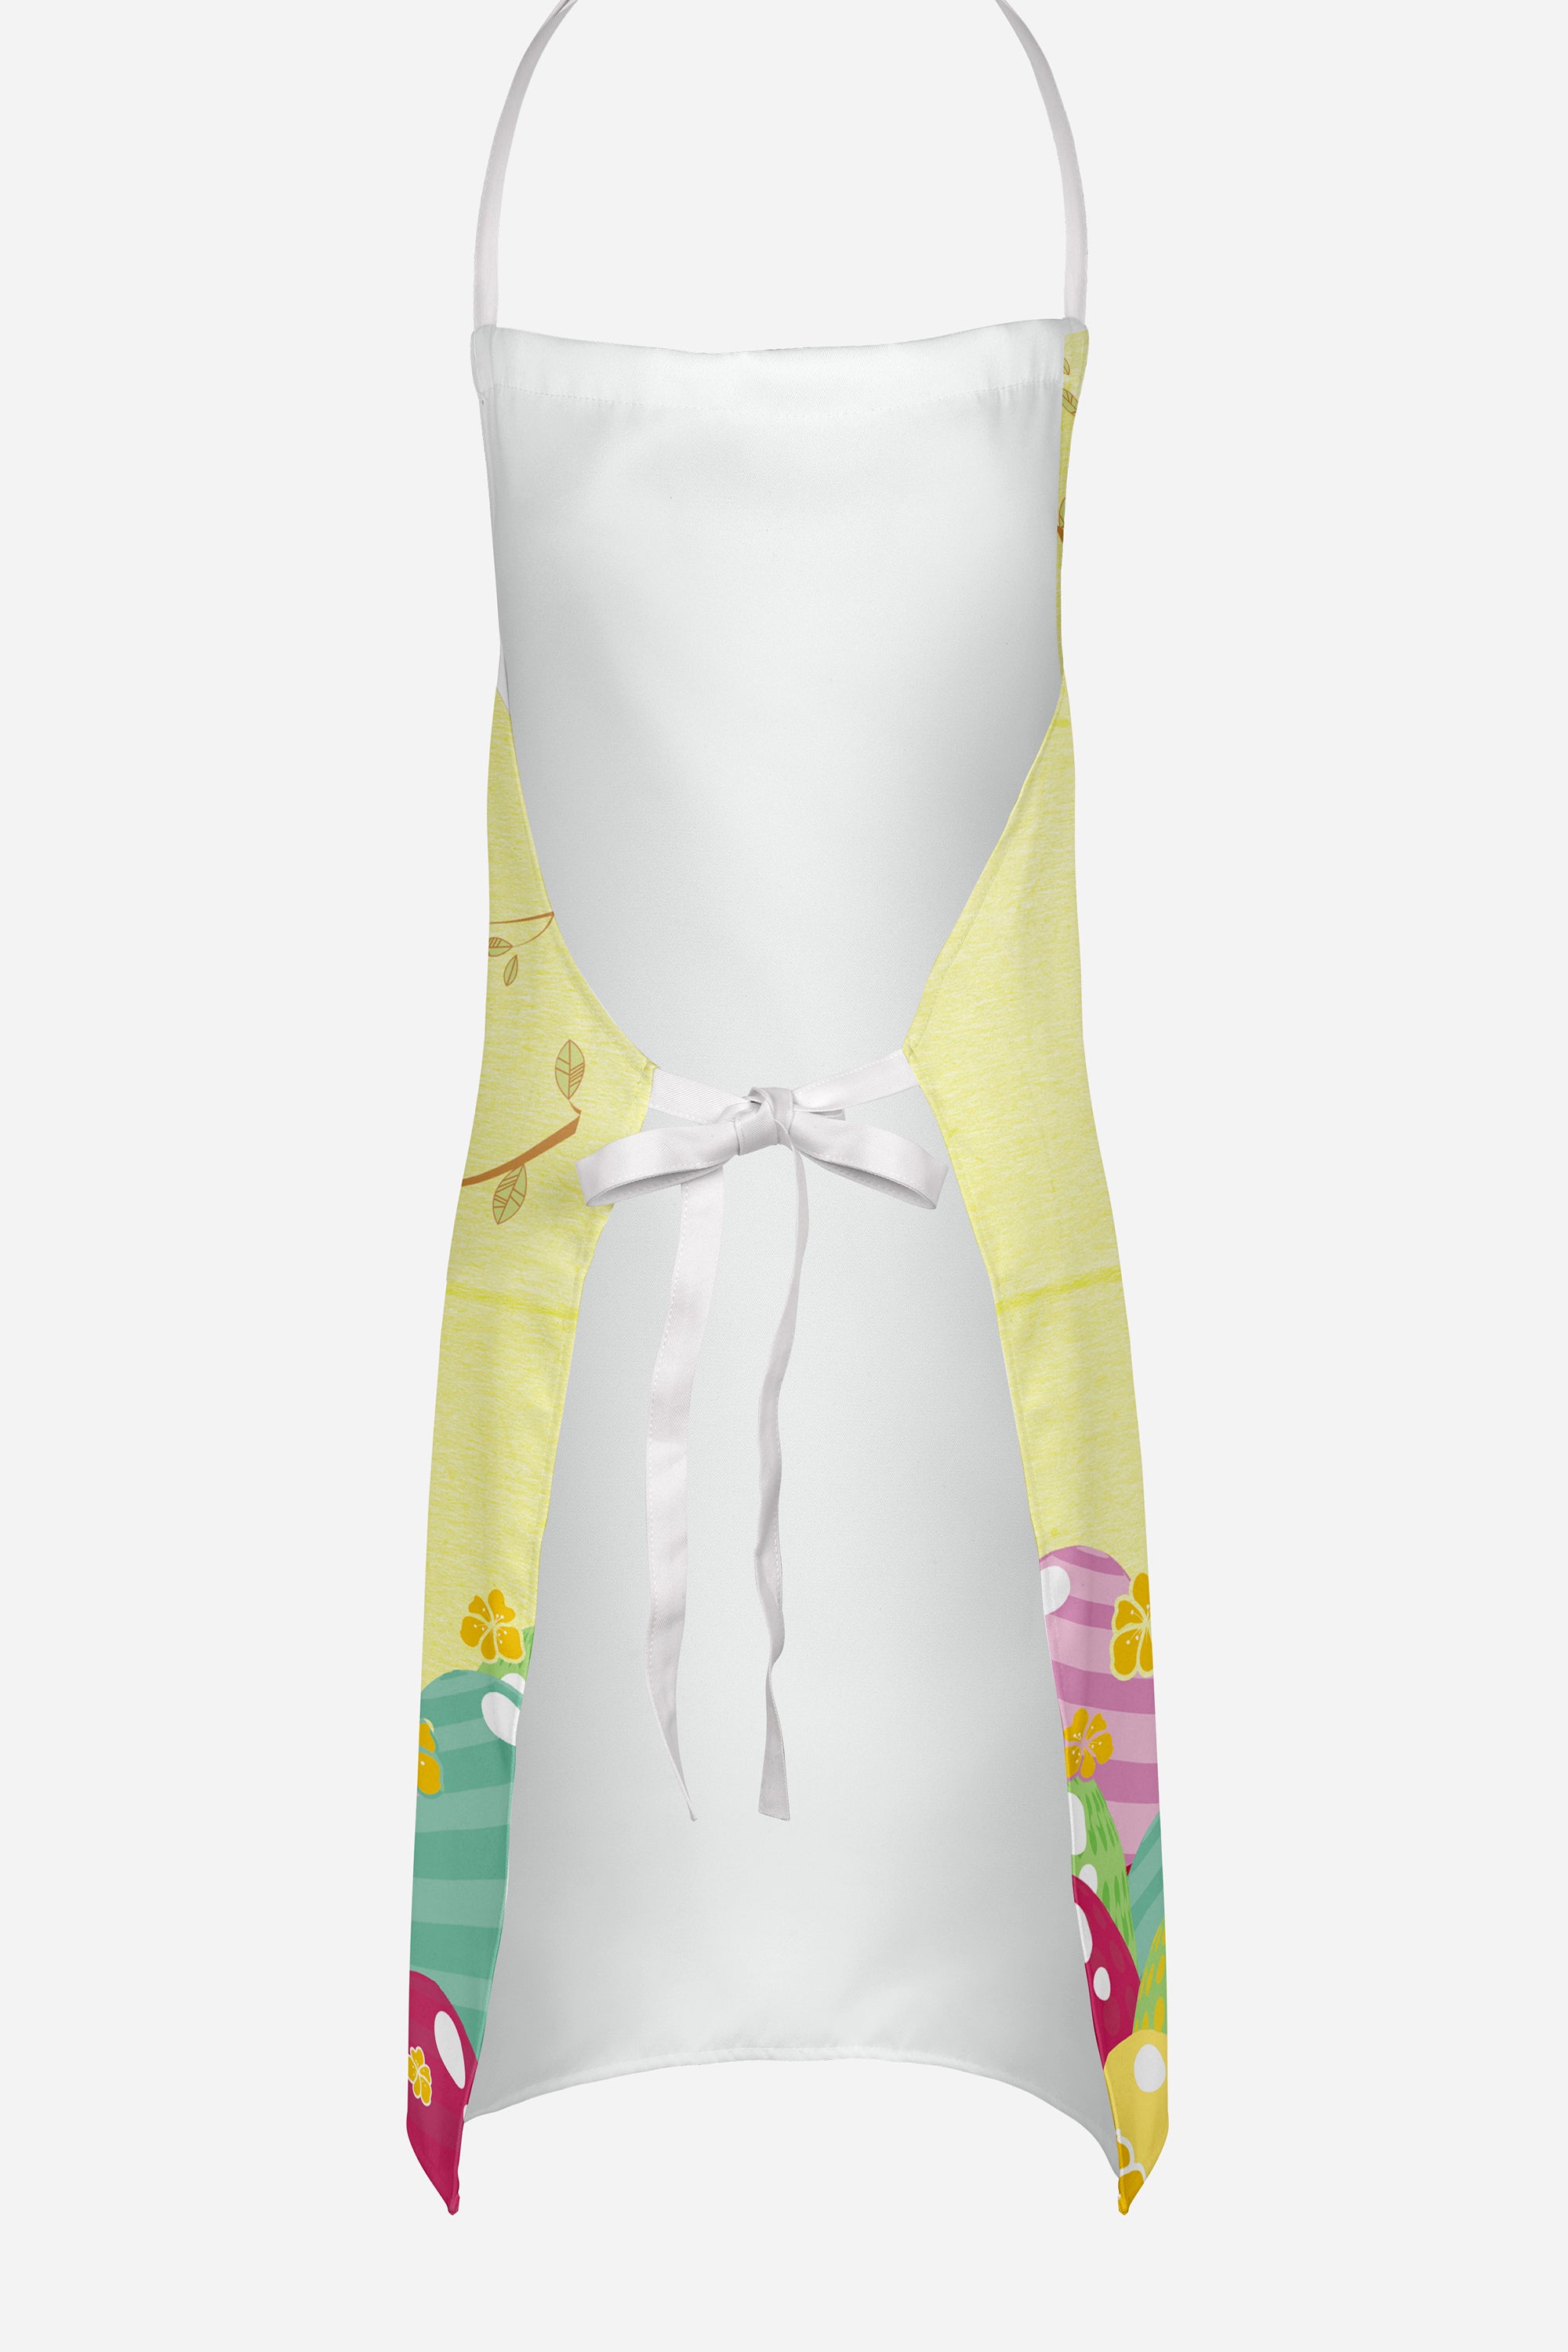 Easter Eggs English Toy Terrier Apron BB6109APRON  the-store.com.